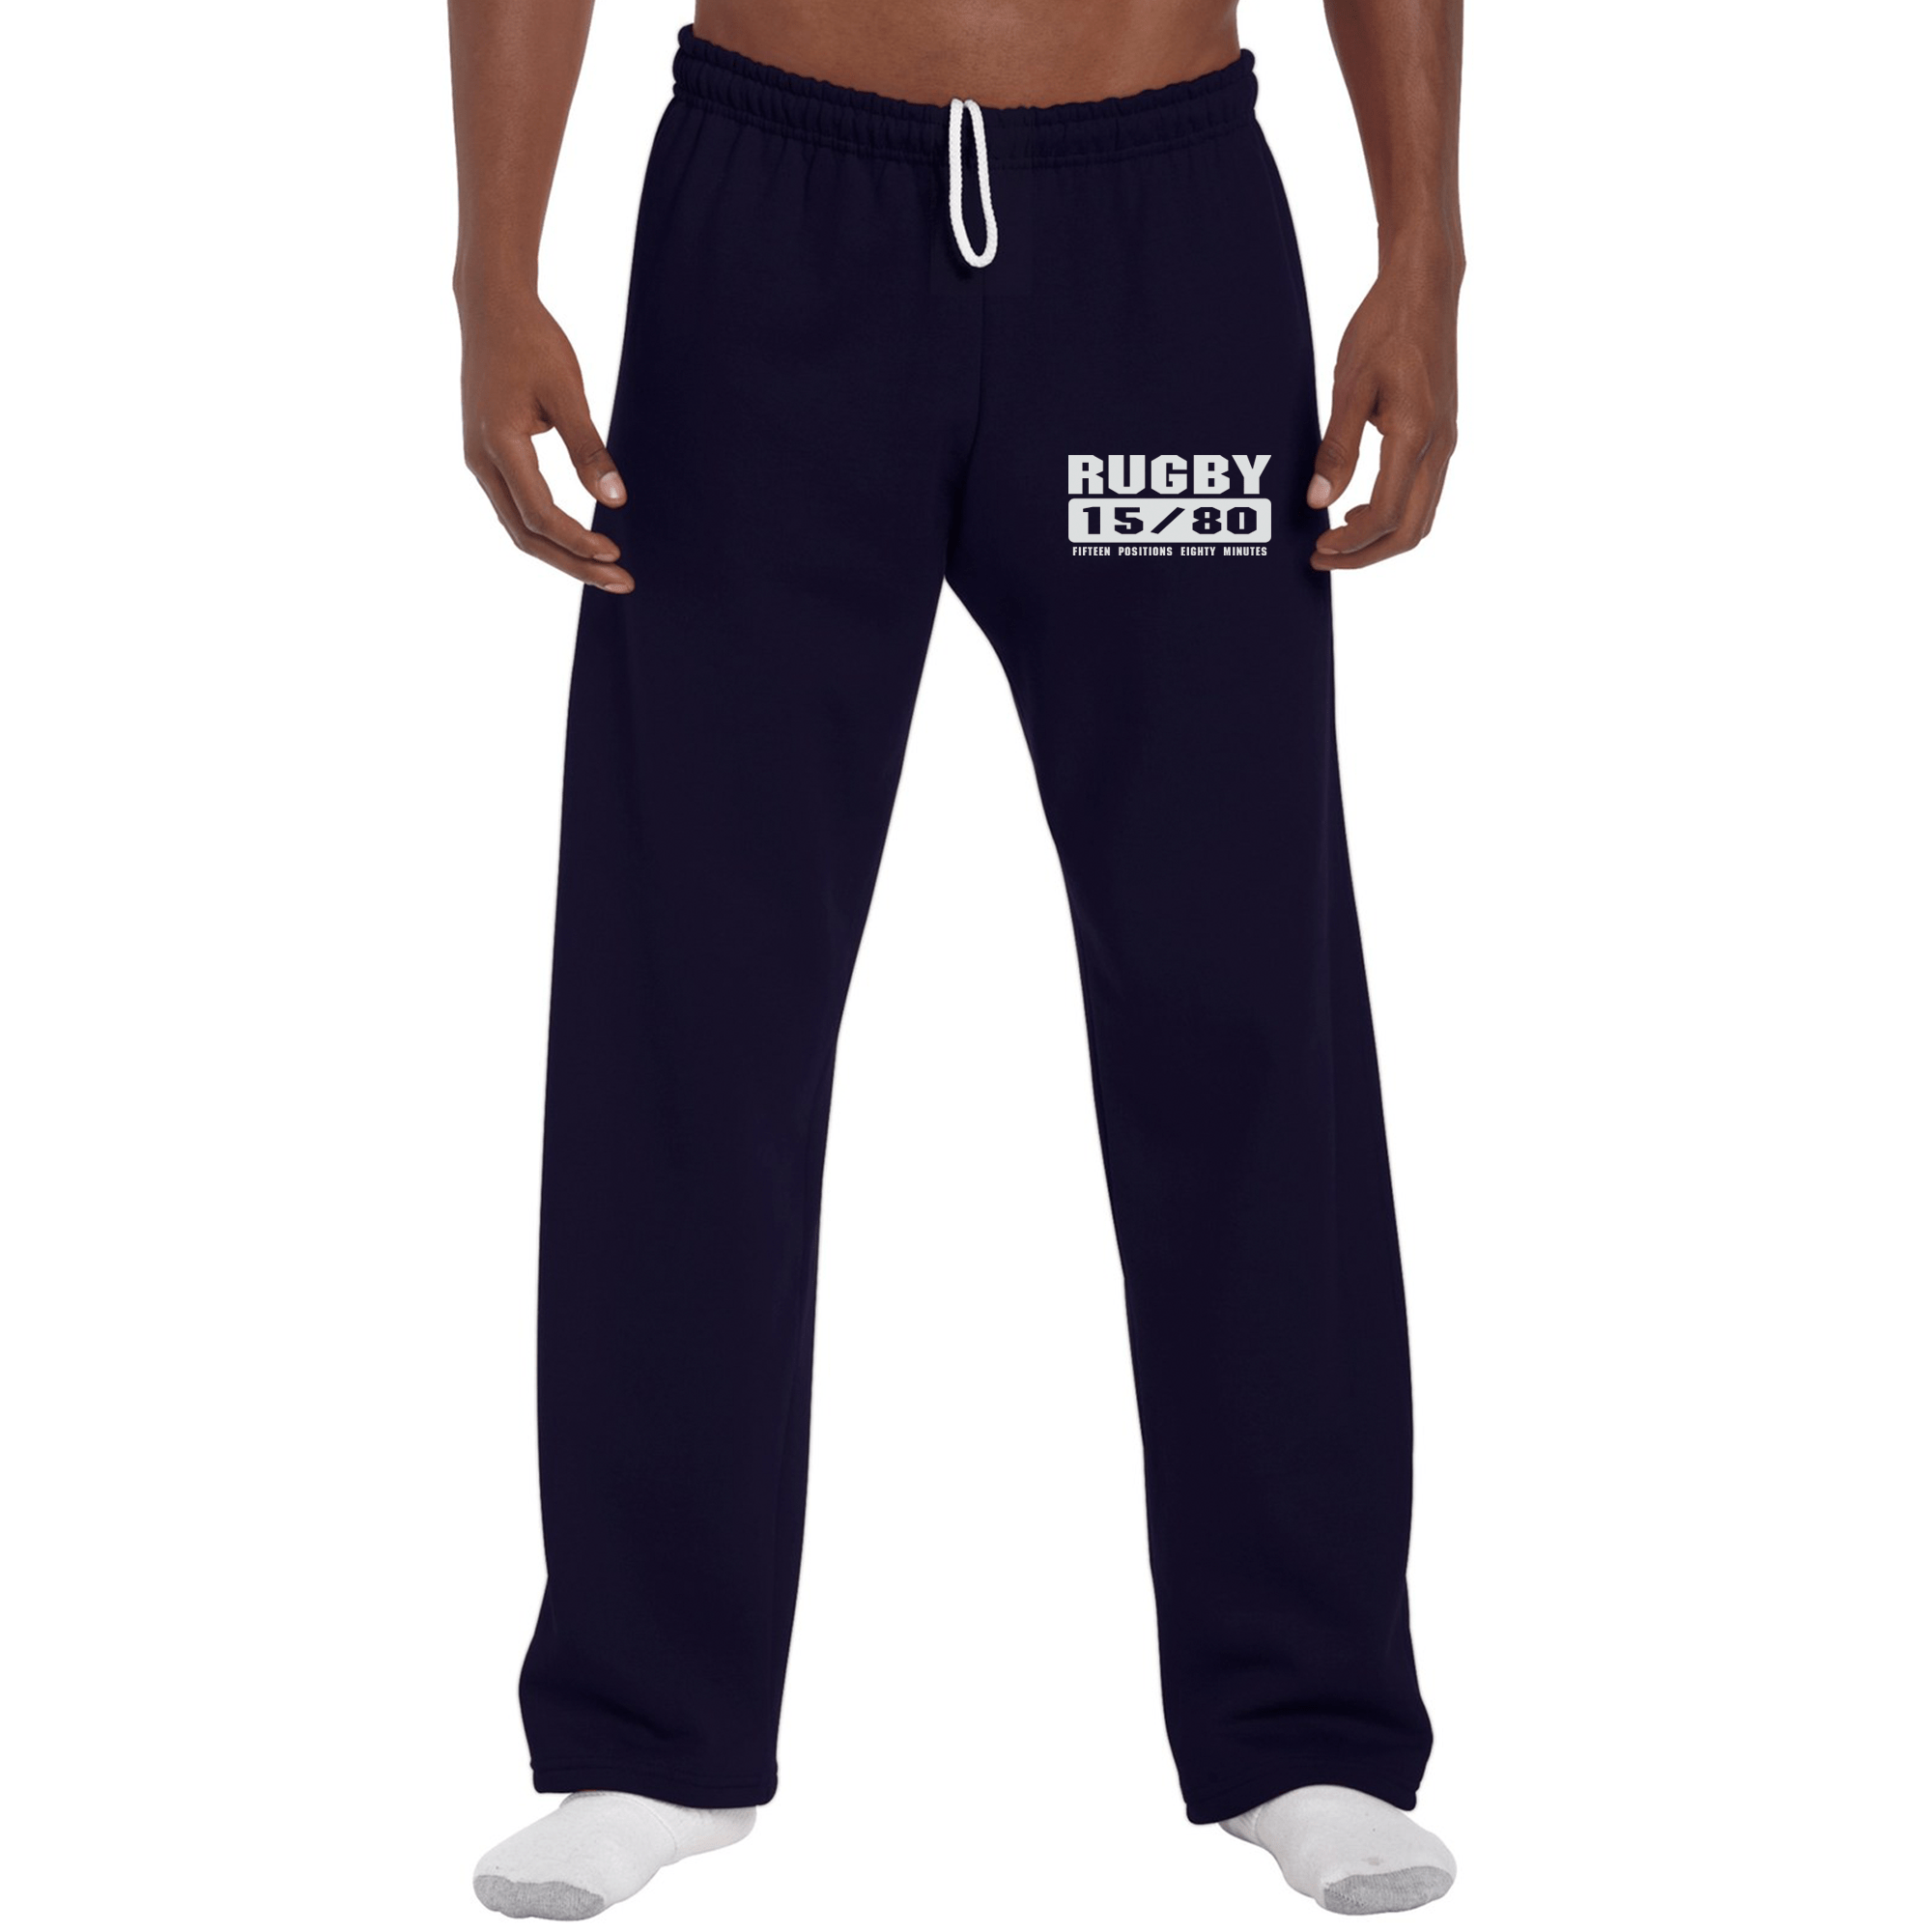 Rugby Sweatpants, Fleece, and Track Pants - Rugby Imports